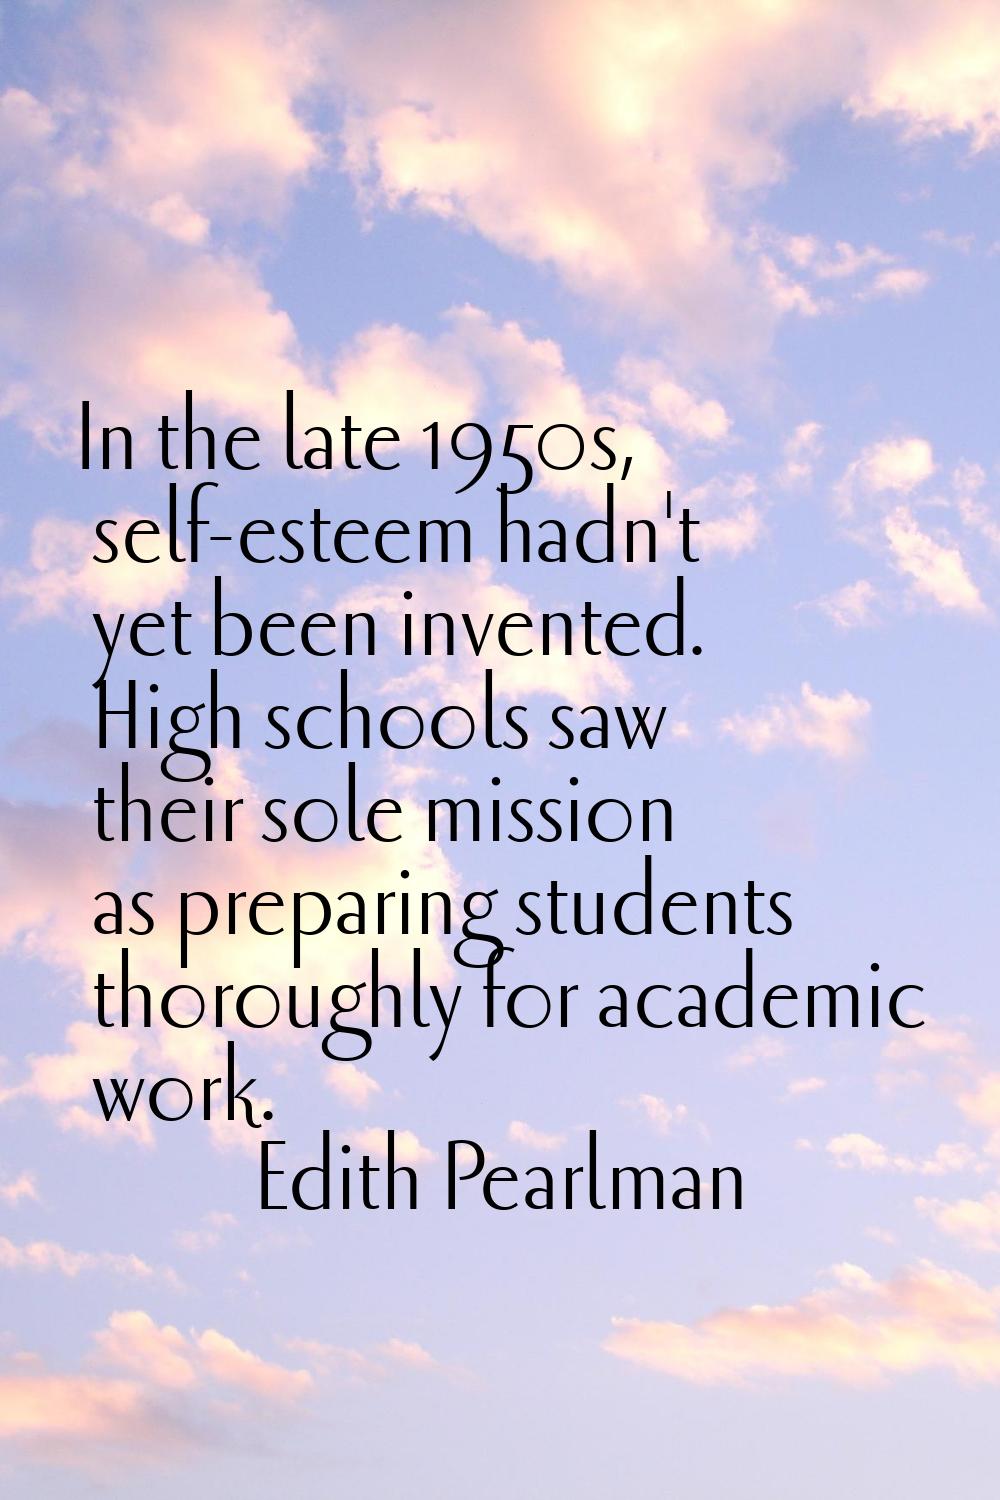 In the late 1950s, self-esteem hadn't yet been invented. High schools saw their sole mission as pre